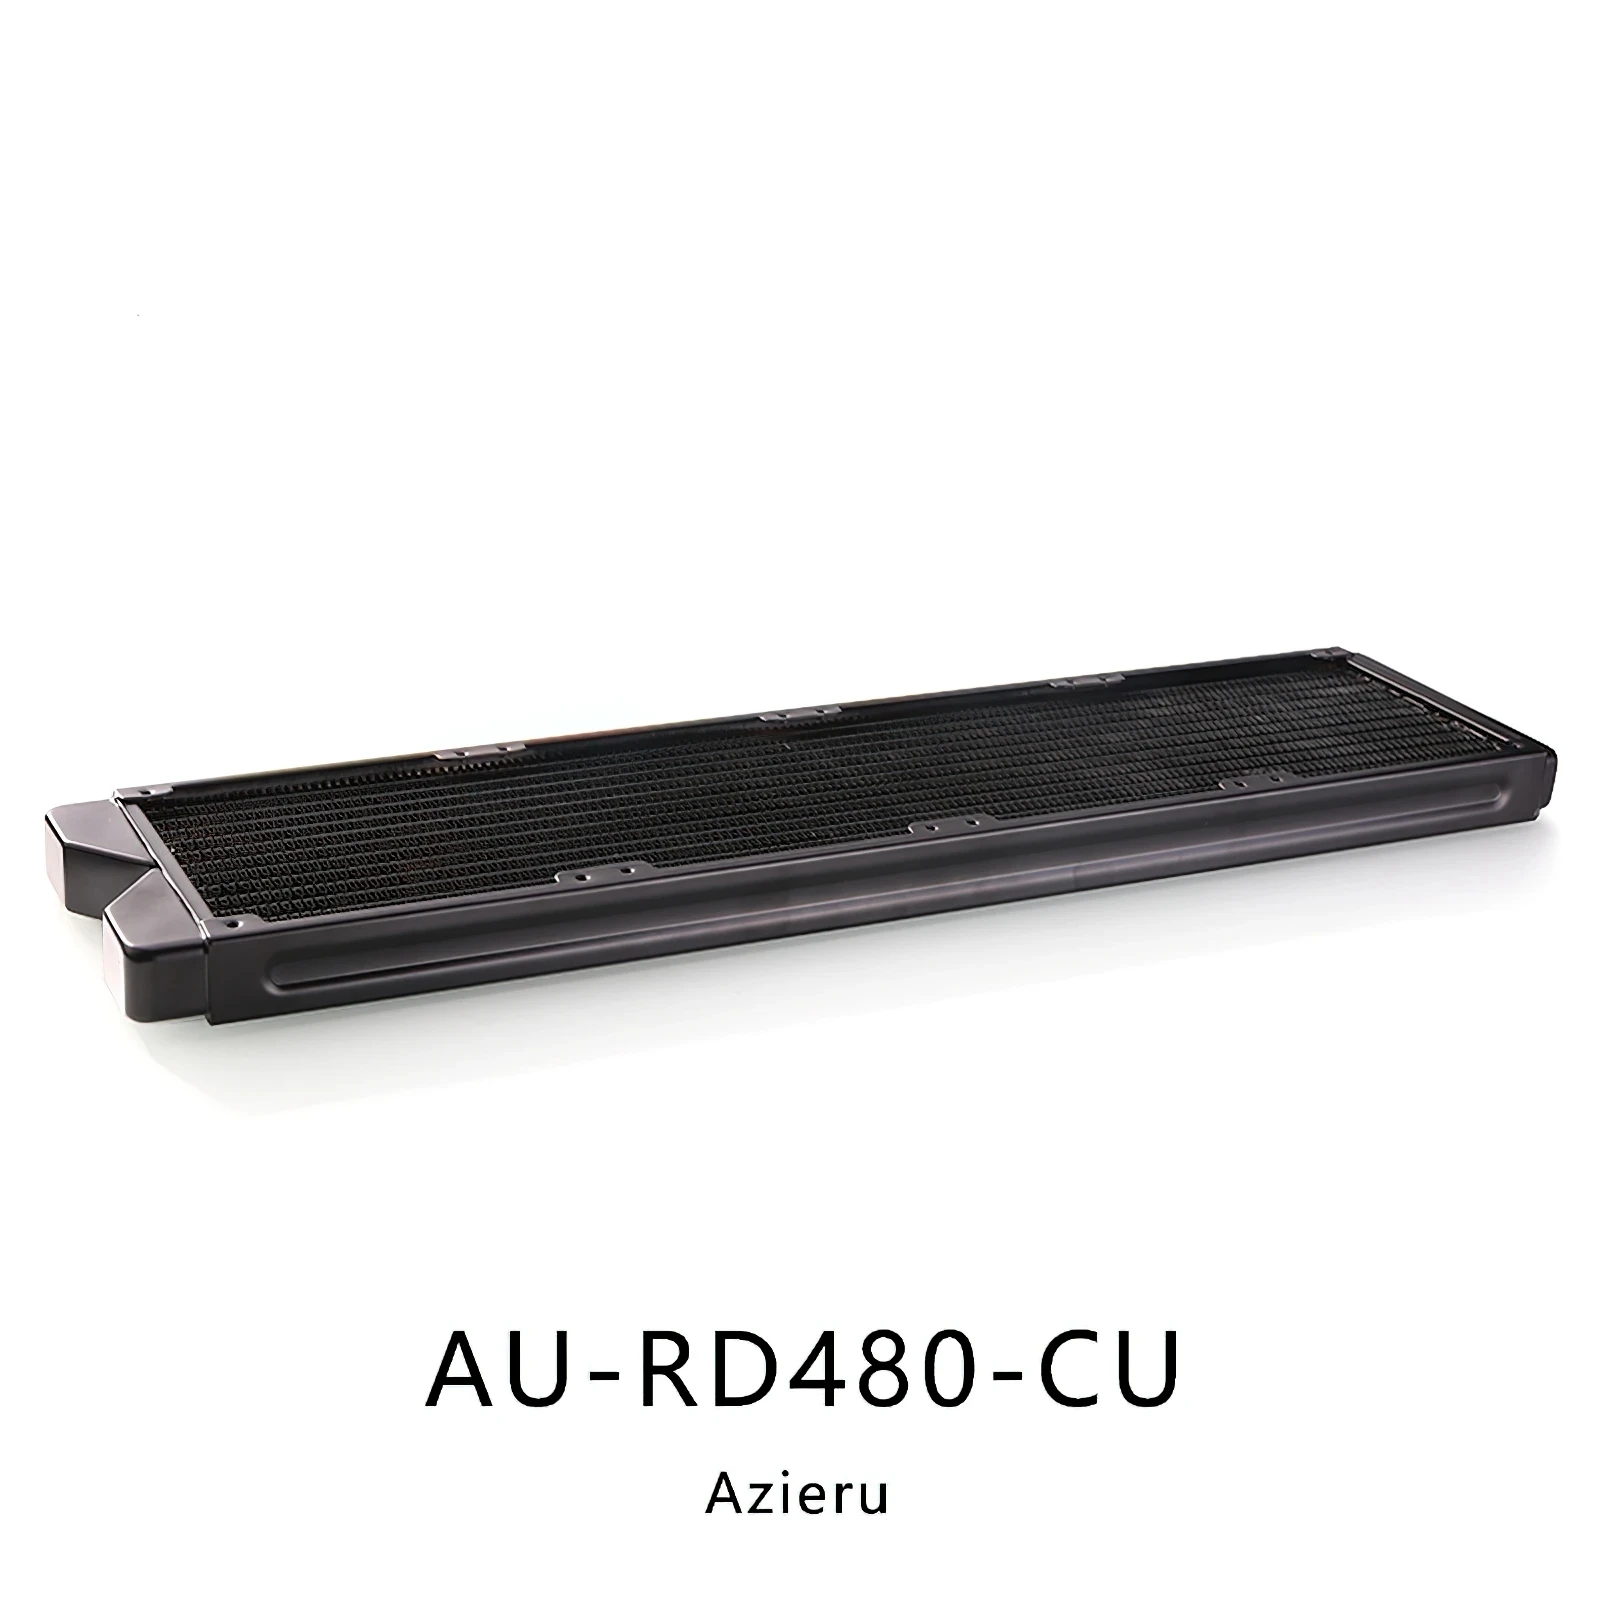 

Azieru 30MM Thick Copper Radiator 480mm PC Cooling Radiator Water Cooler Row Support 12cm Fans AU-RD480-CU